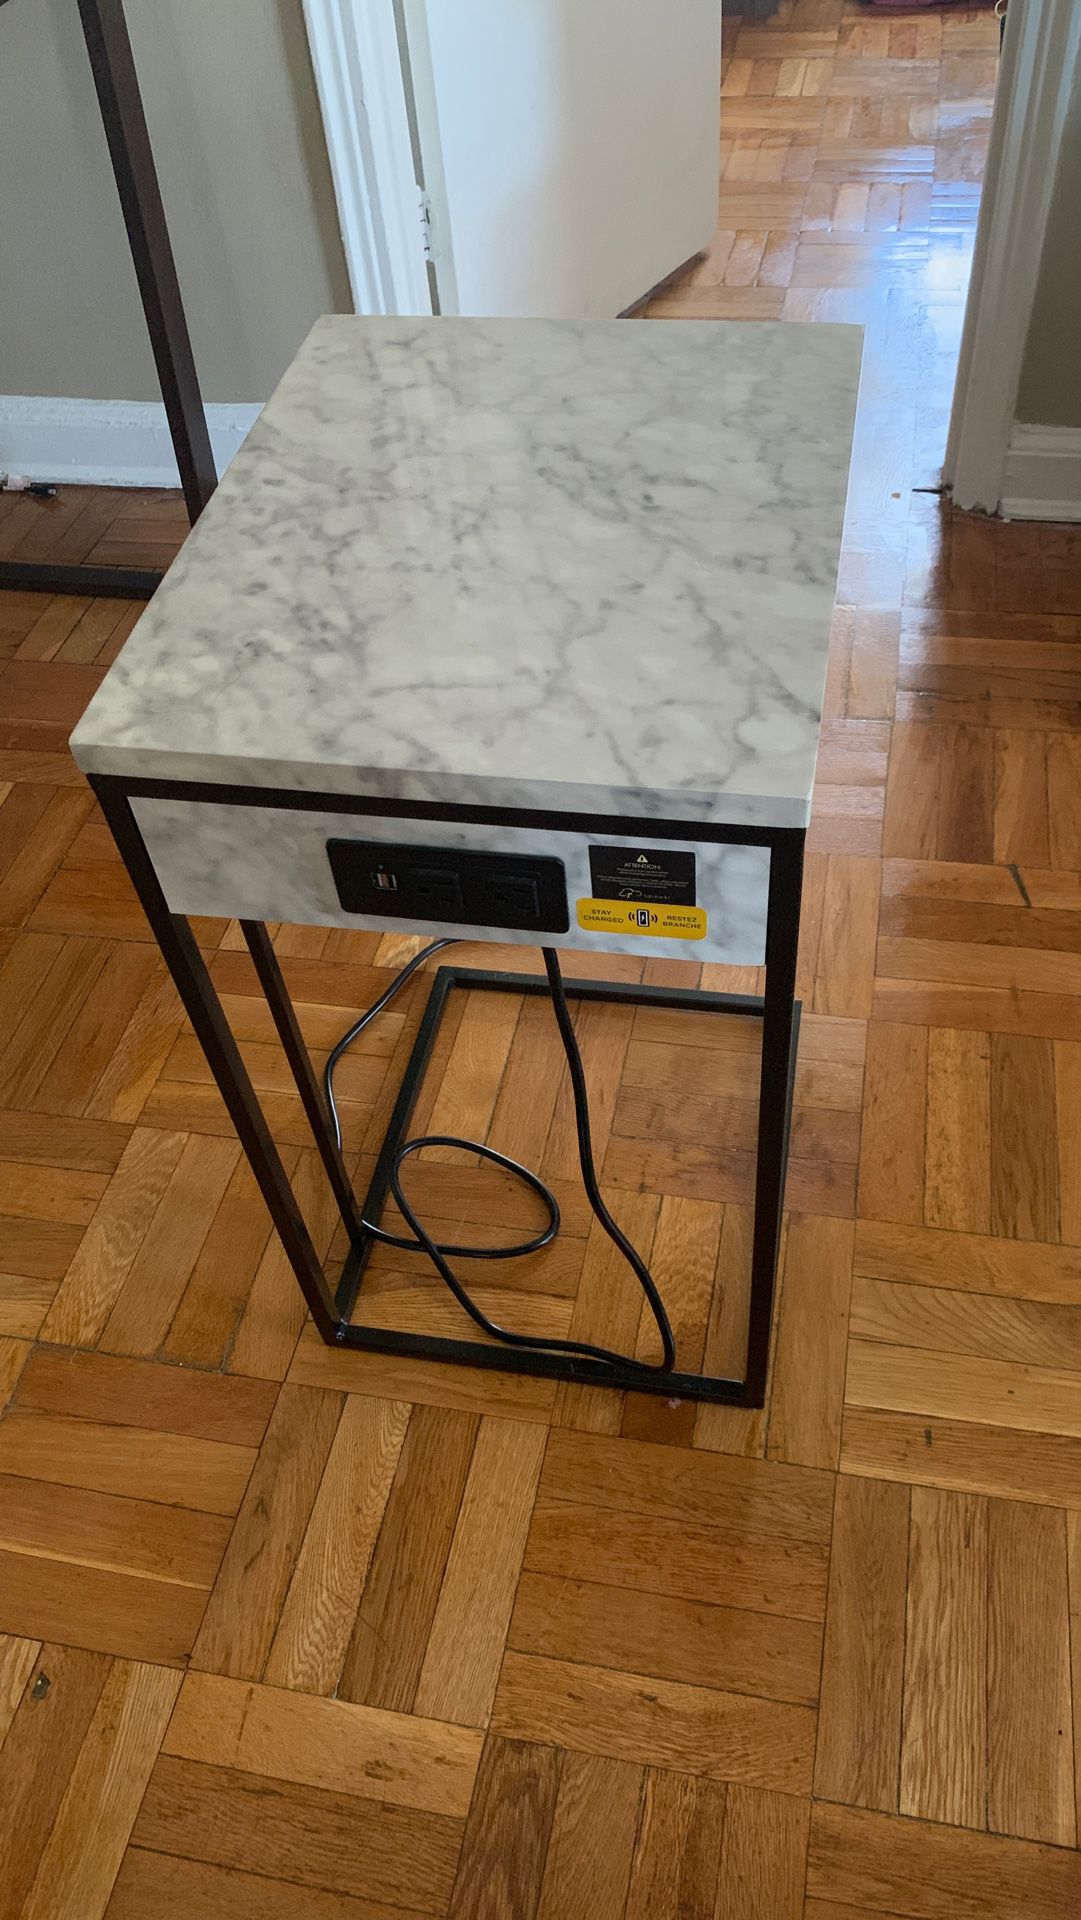 Marble side table with outlets connected